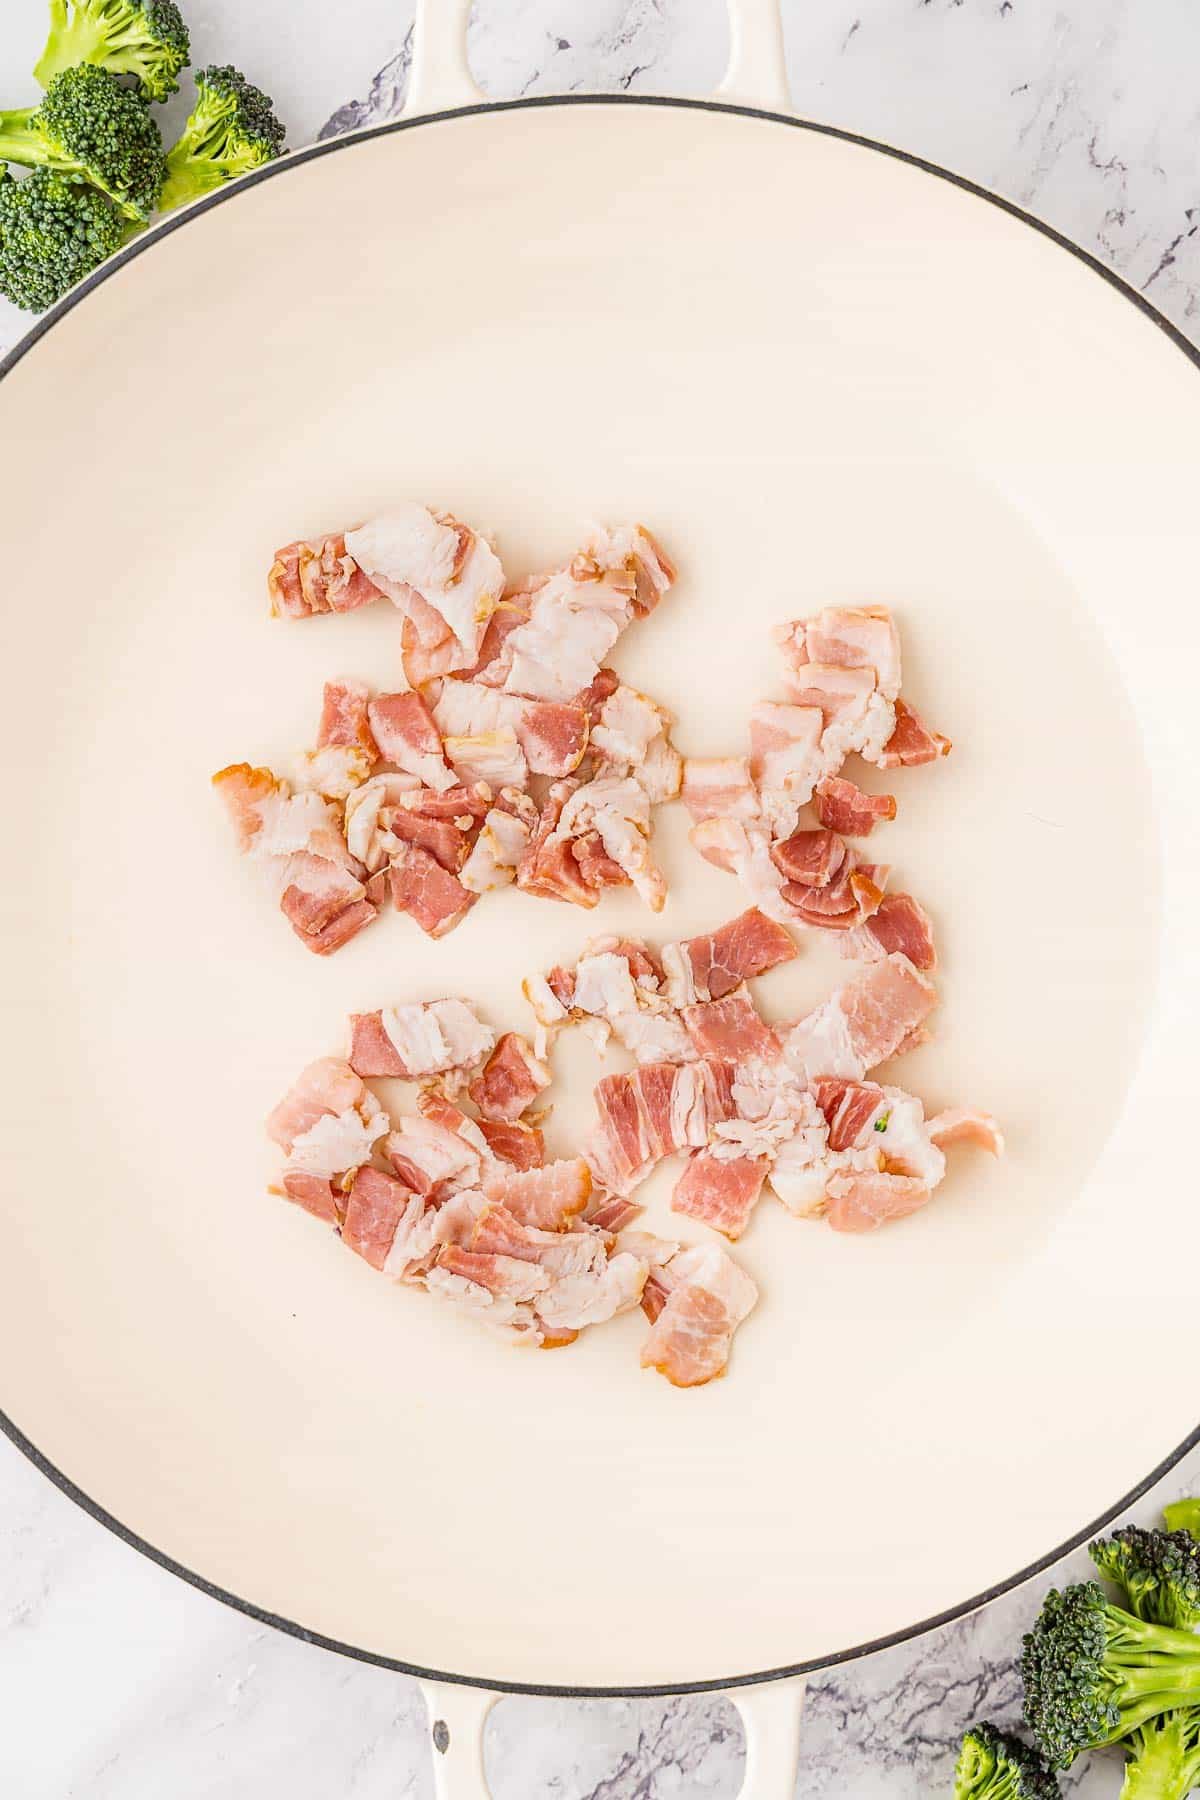 Bacon bits on a white plate.